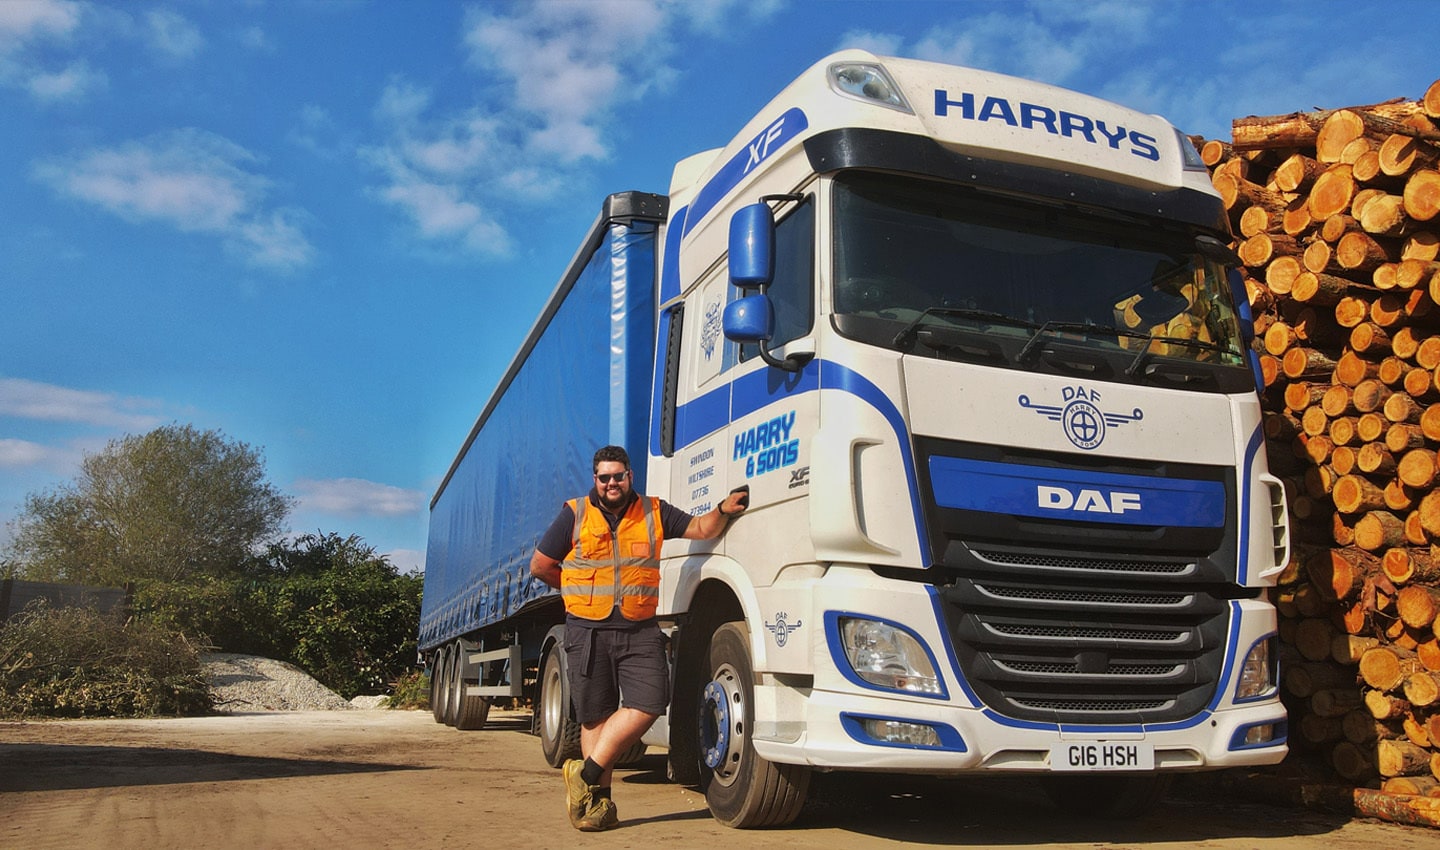 Truck driver Luke Cuss is a 3rd generation UK based driver, and has been on the road since 2016.